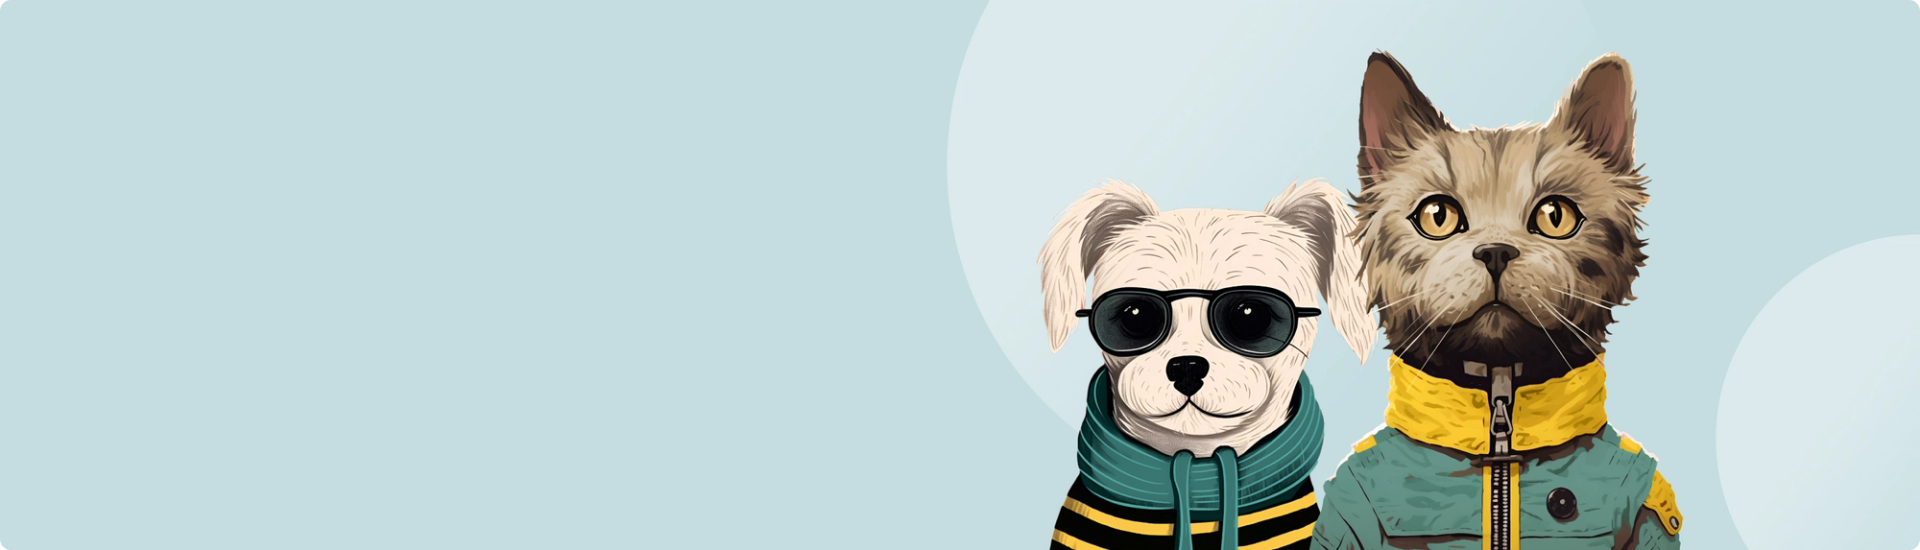 Want to know what it takes to make your brand the top dog?